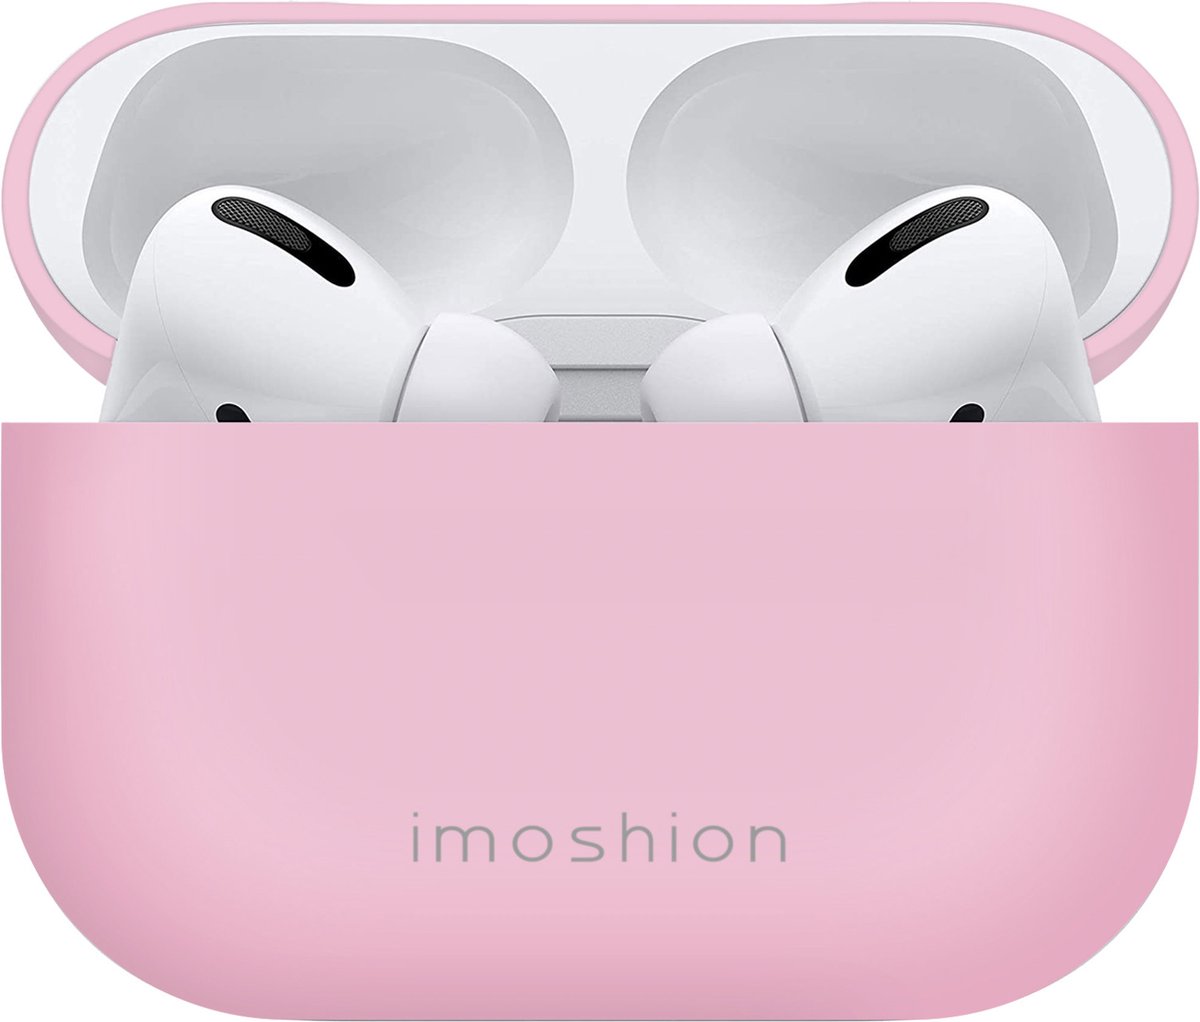 AirPods Pro Hoesje - iMoshion Hardcover Case - Roze